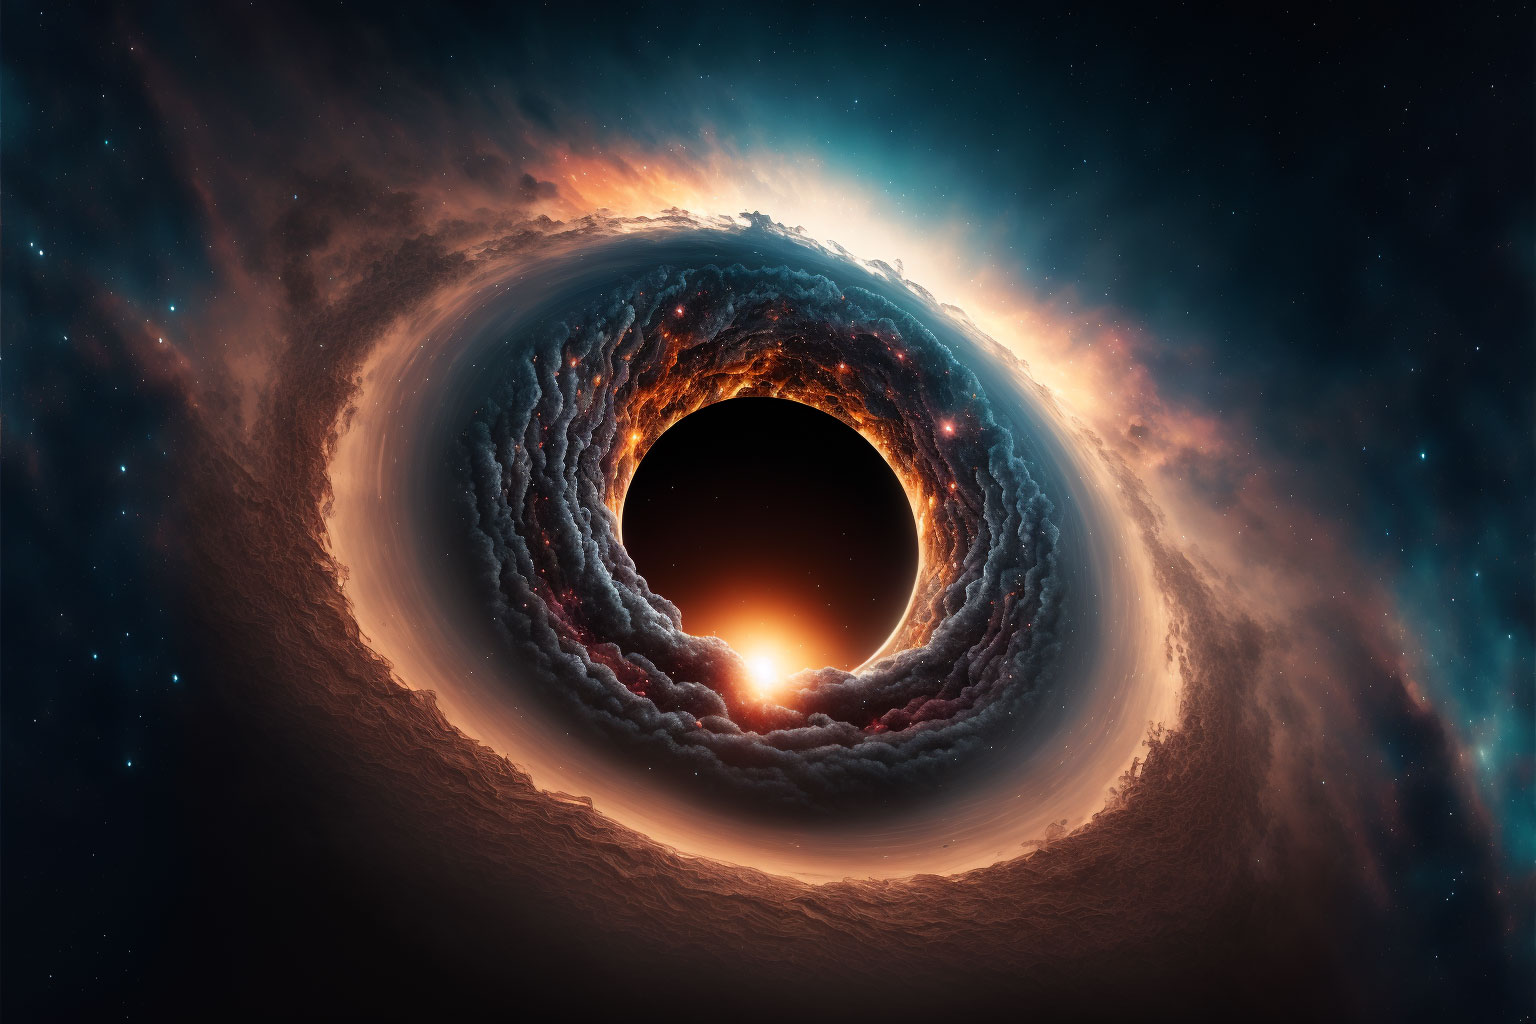 object getting sucked up by a black hole